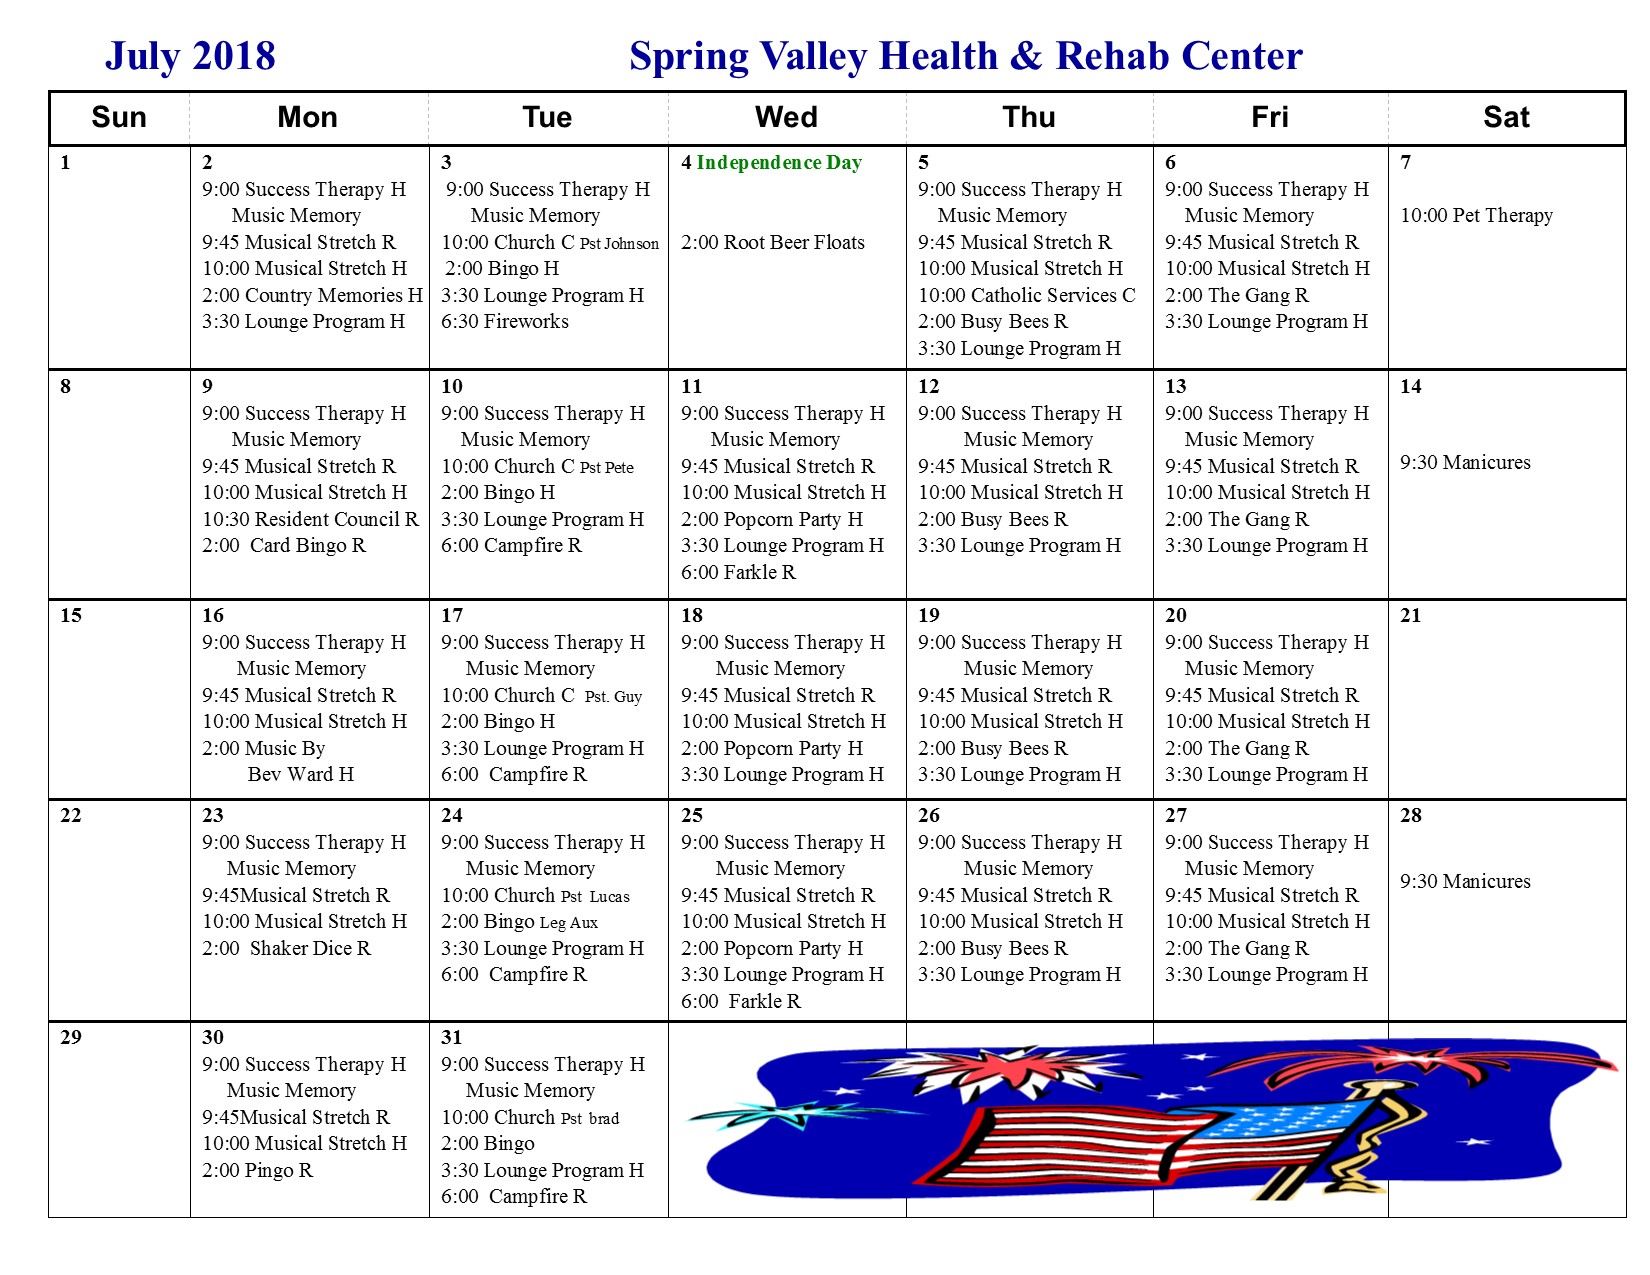 July Activity Calendar Spring Valley Senior Living and Health Care Campus